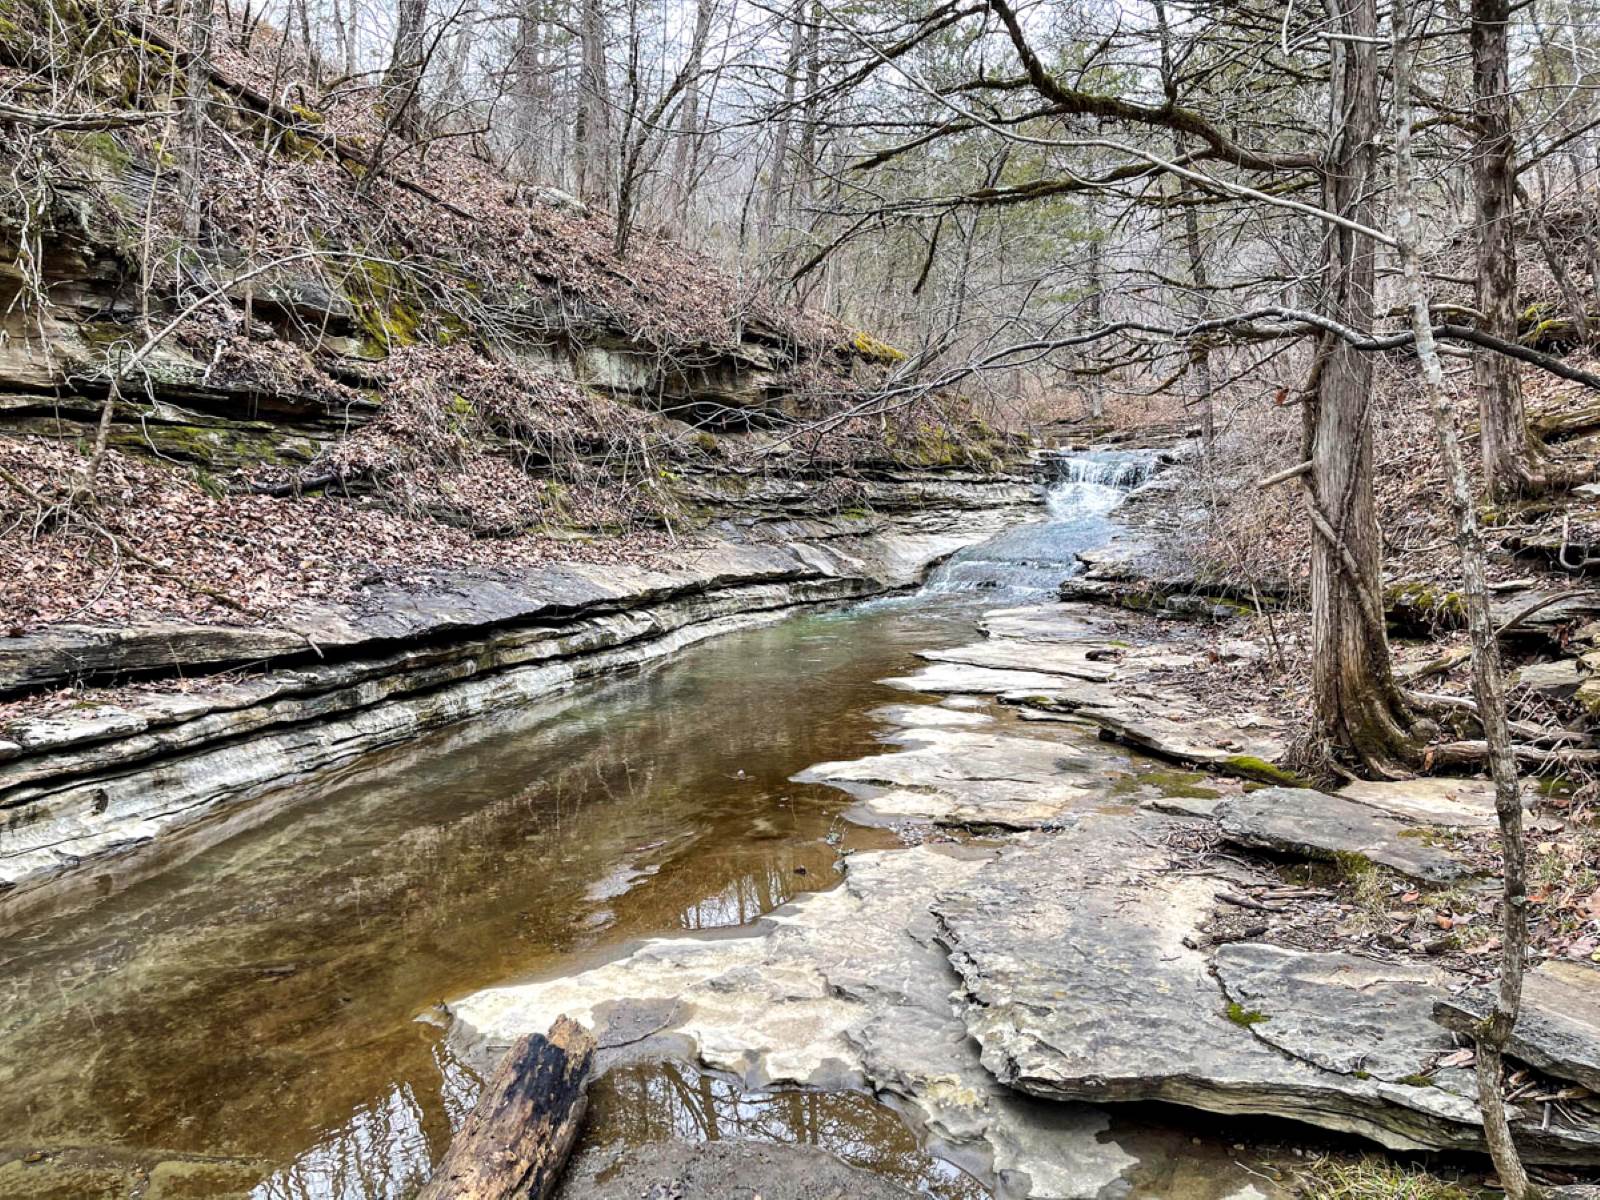 It’s easy to walk back upstream to view or photograph the small unnamed falls near the start of the trail. (Photo by Sony Hocklander)